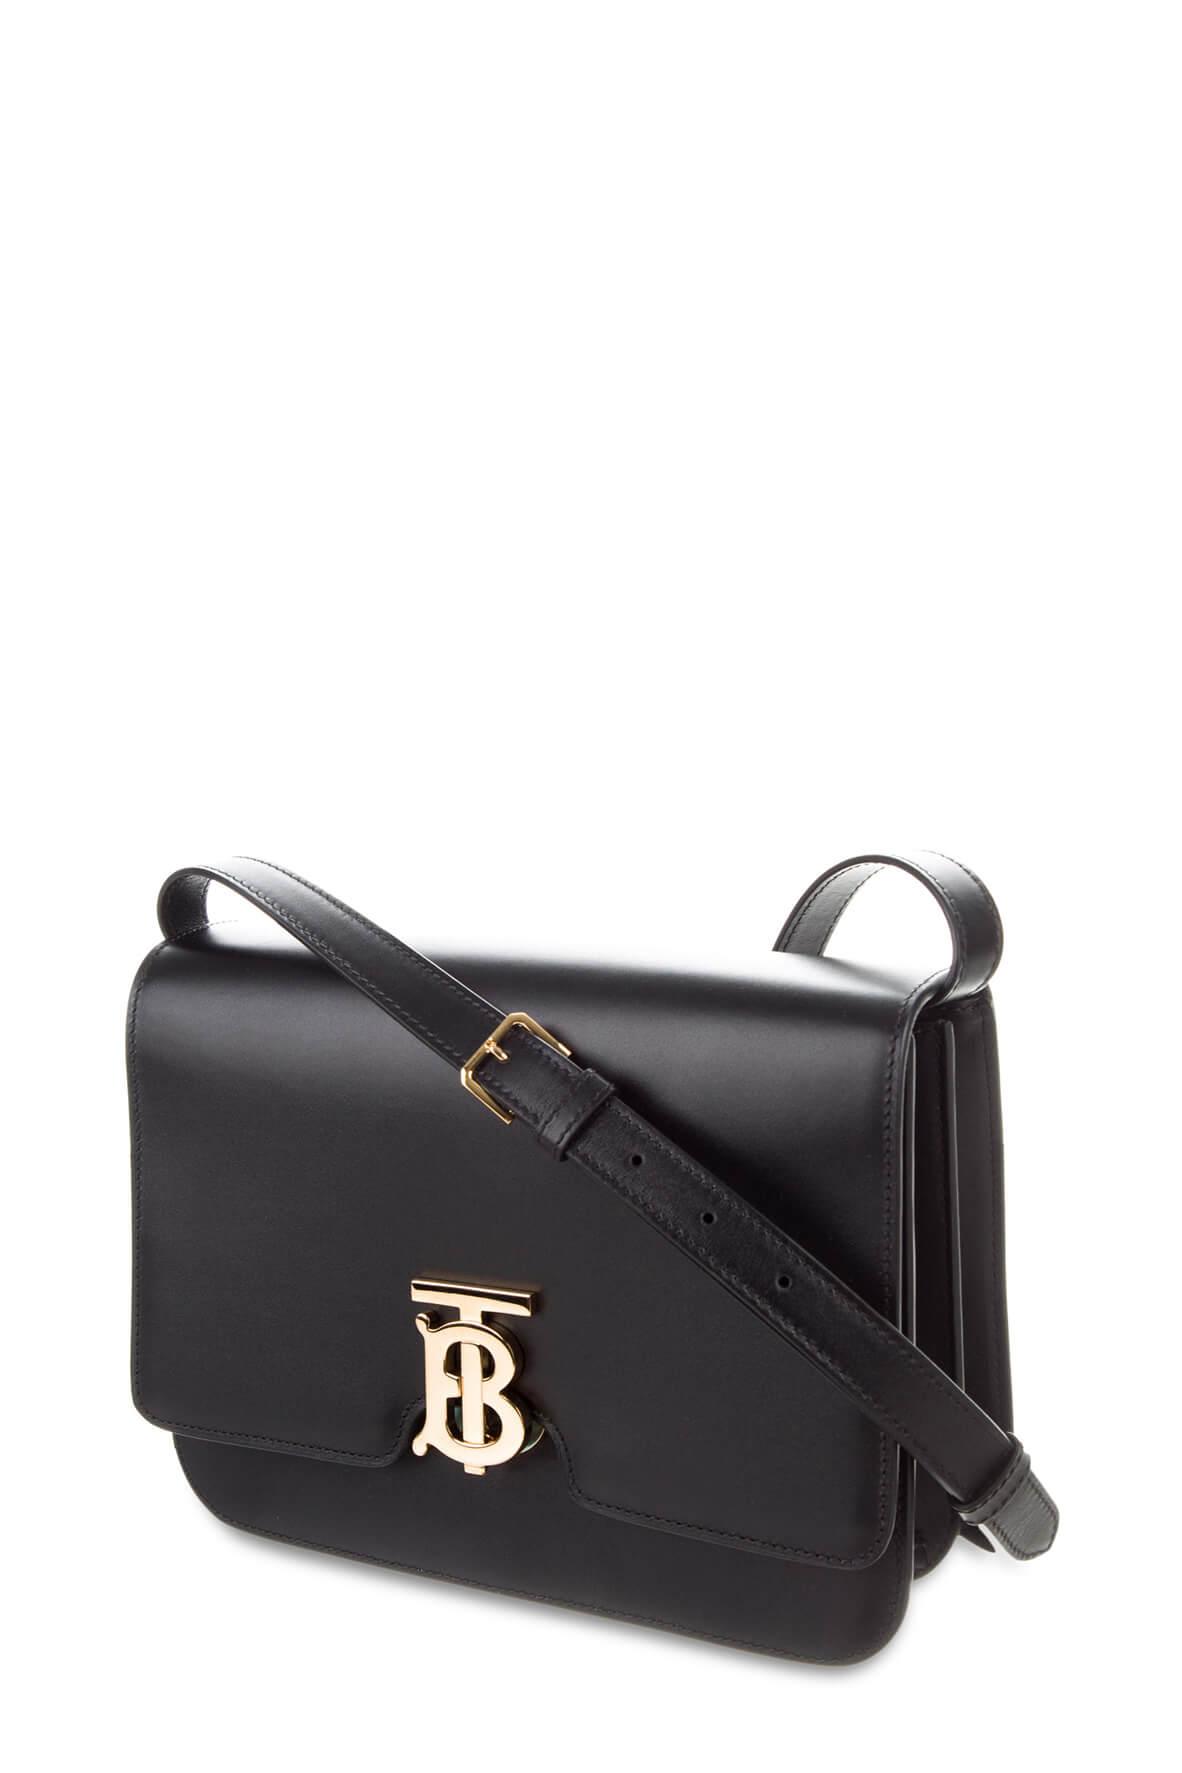 Burberry Small Grainy Leather TB Bag Black in Calfskin with Gold-tone - US